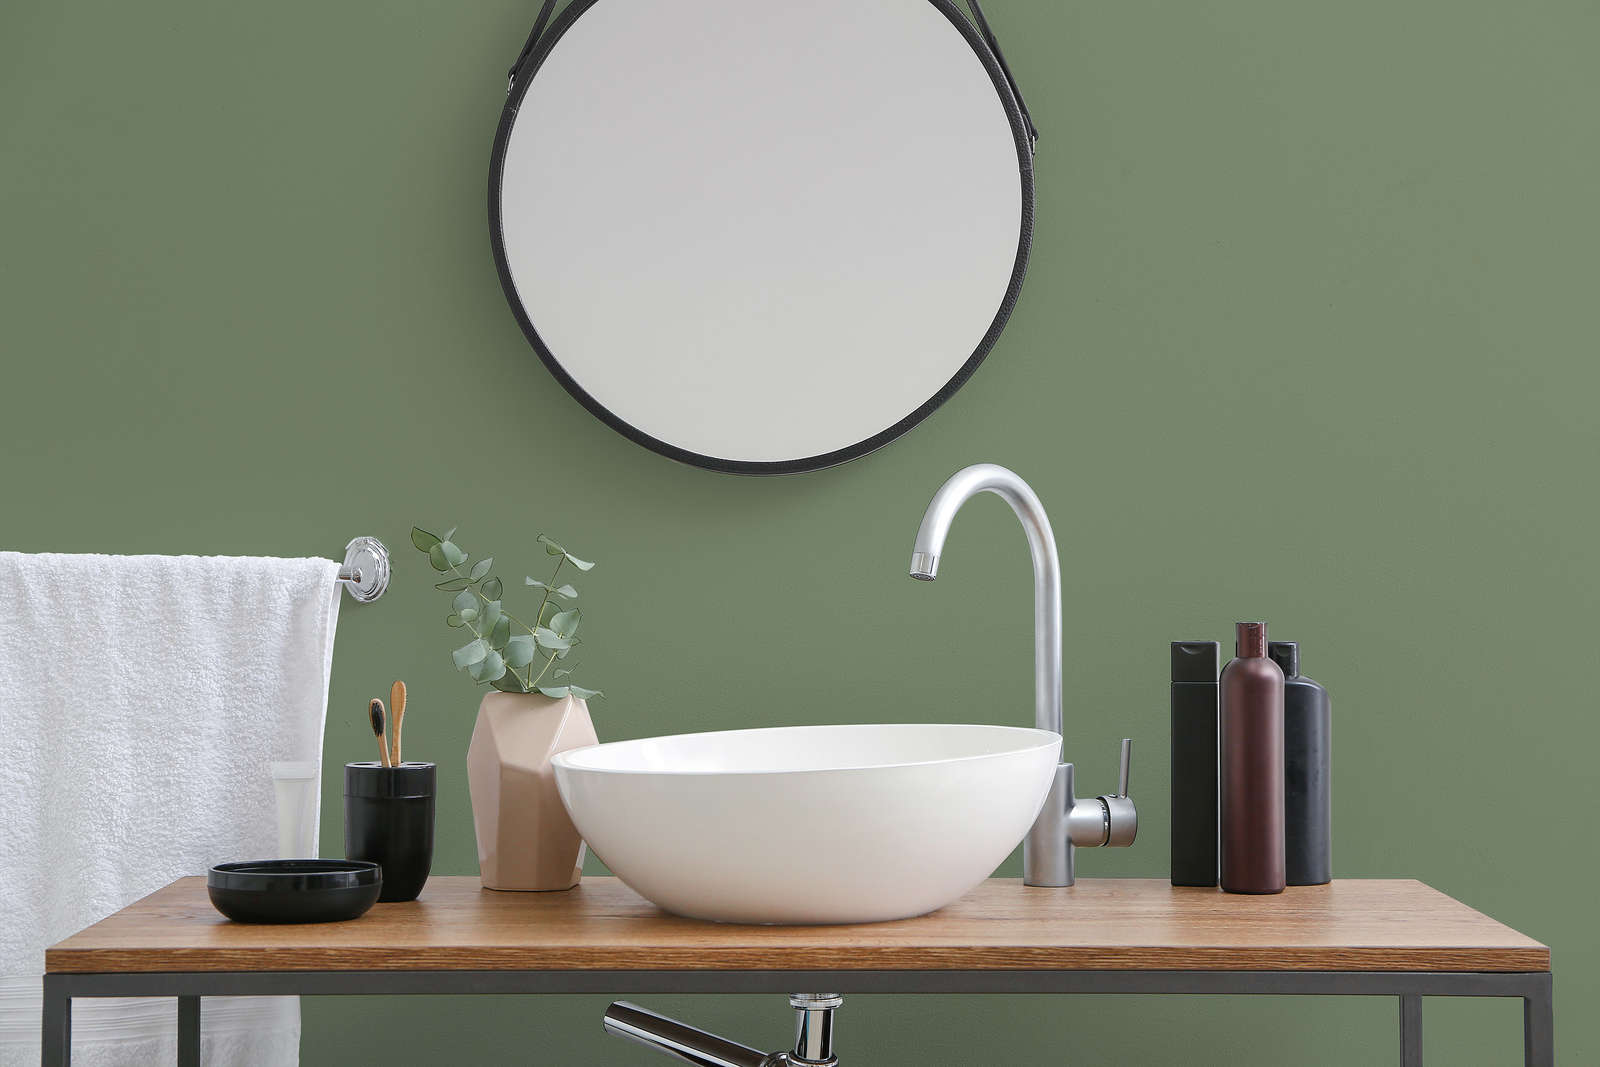             Premium Wall Paint Nature Olive Green »Gorgeous Green« NW503 – 2.5 litre
        